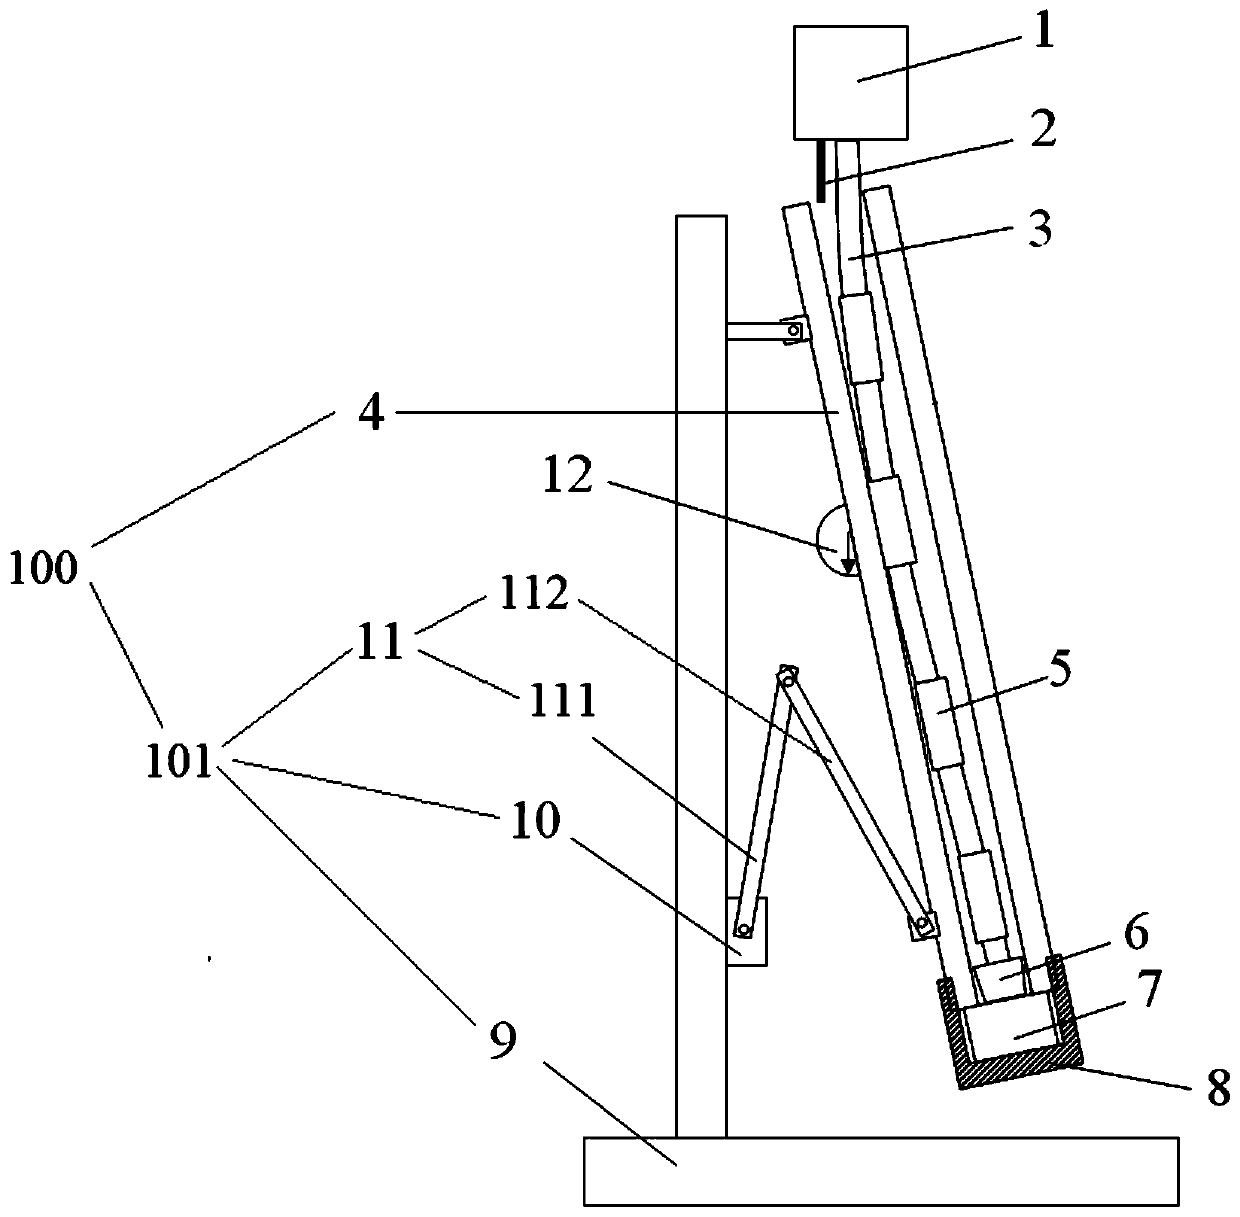 Casing buckling evaluation system in inclined shaft cementing process